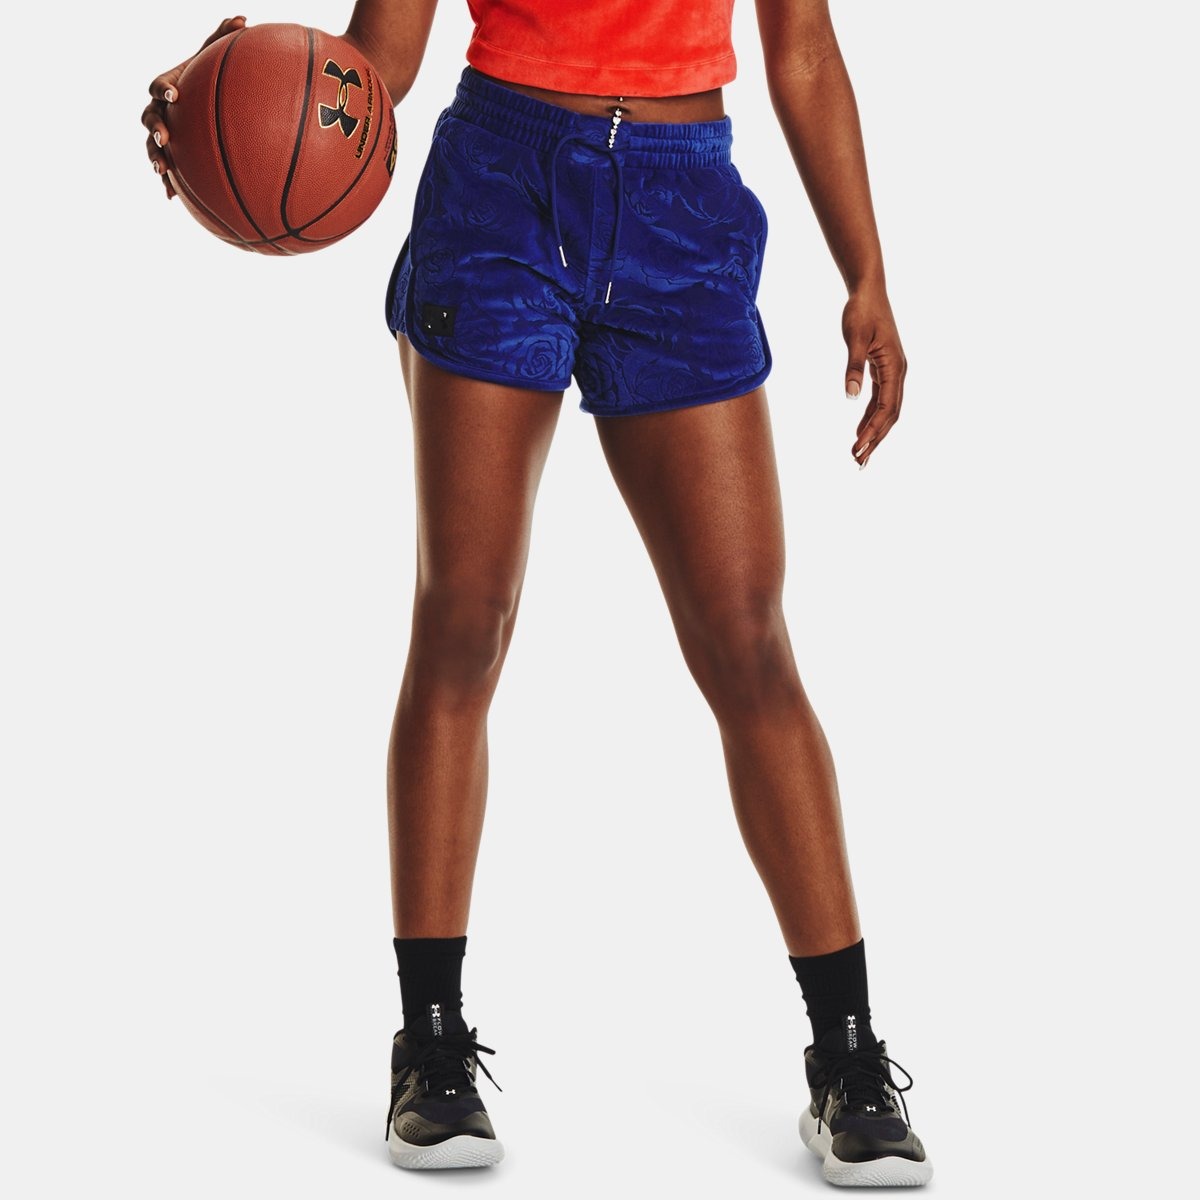 Under Armour - Blue Shorts for Woman GOOFASH